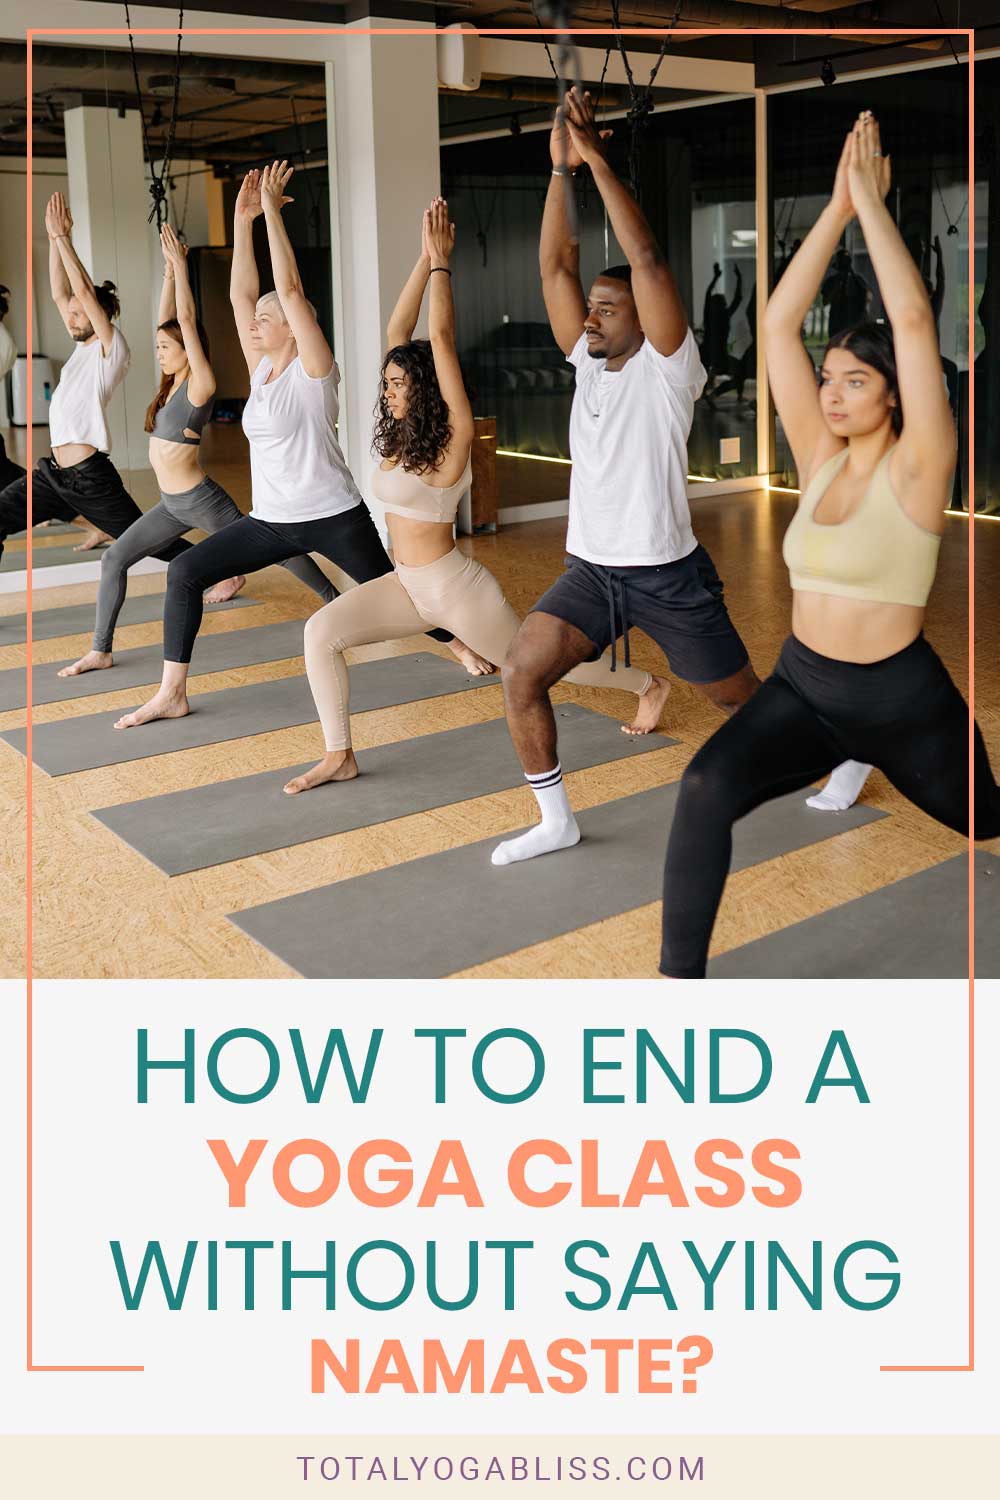 How To End A Yoga Class Without Saying Namaste?